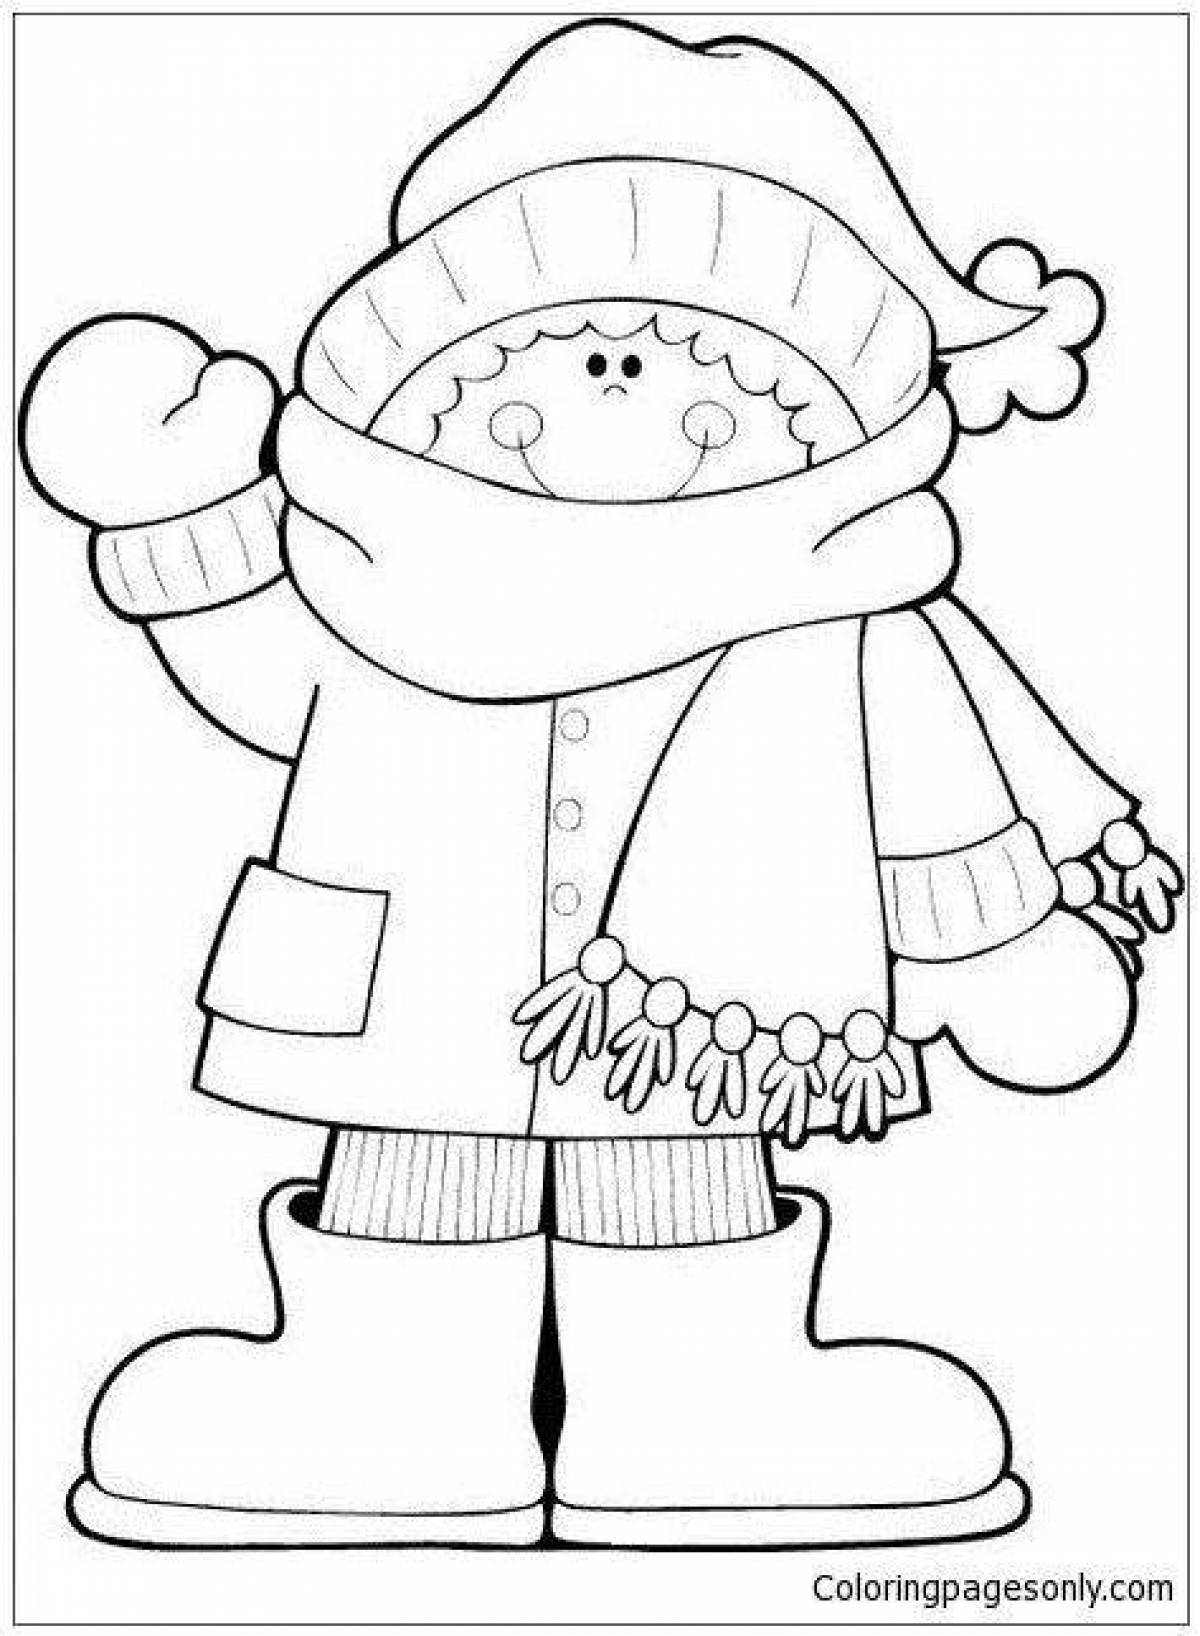 Cute boy coloring in winter clothes